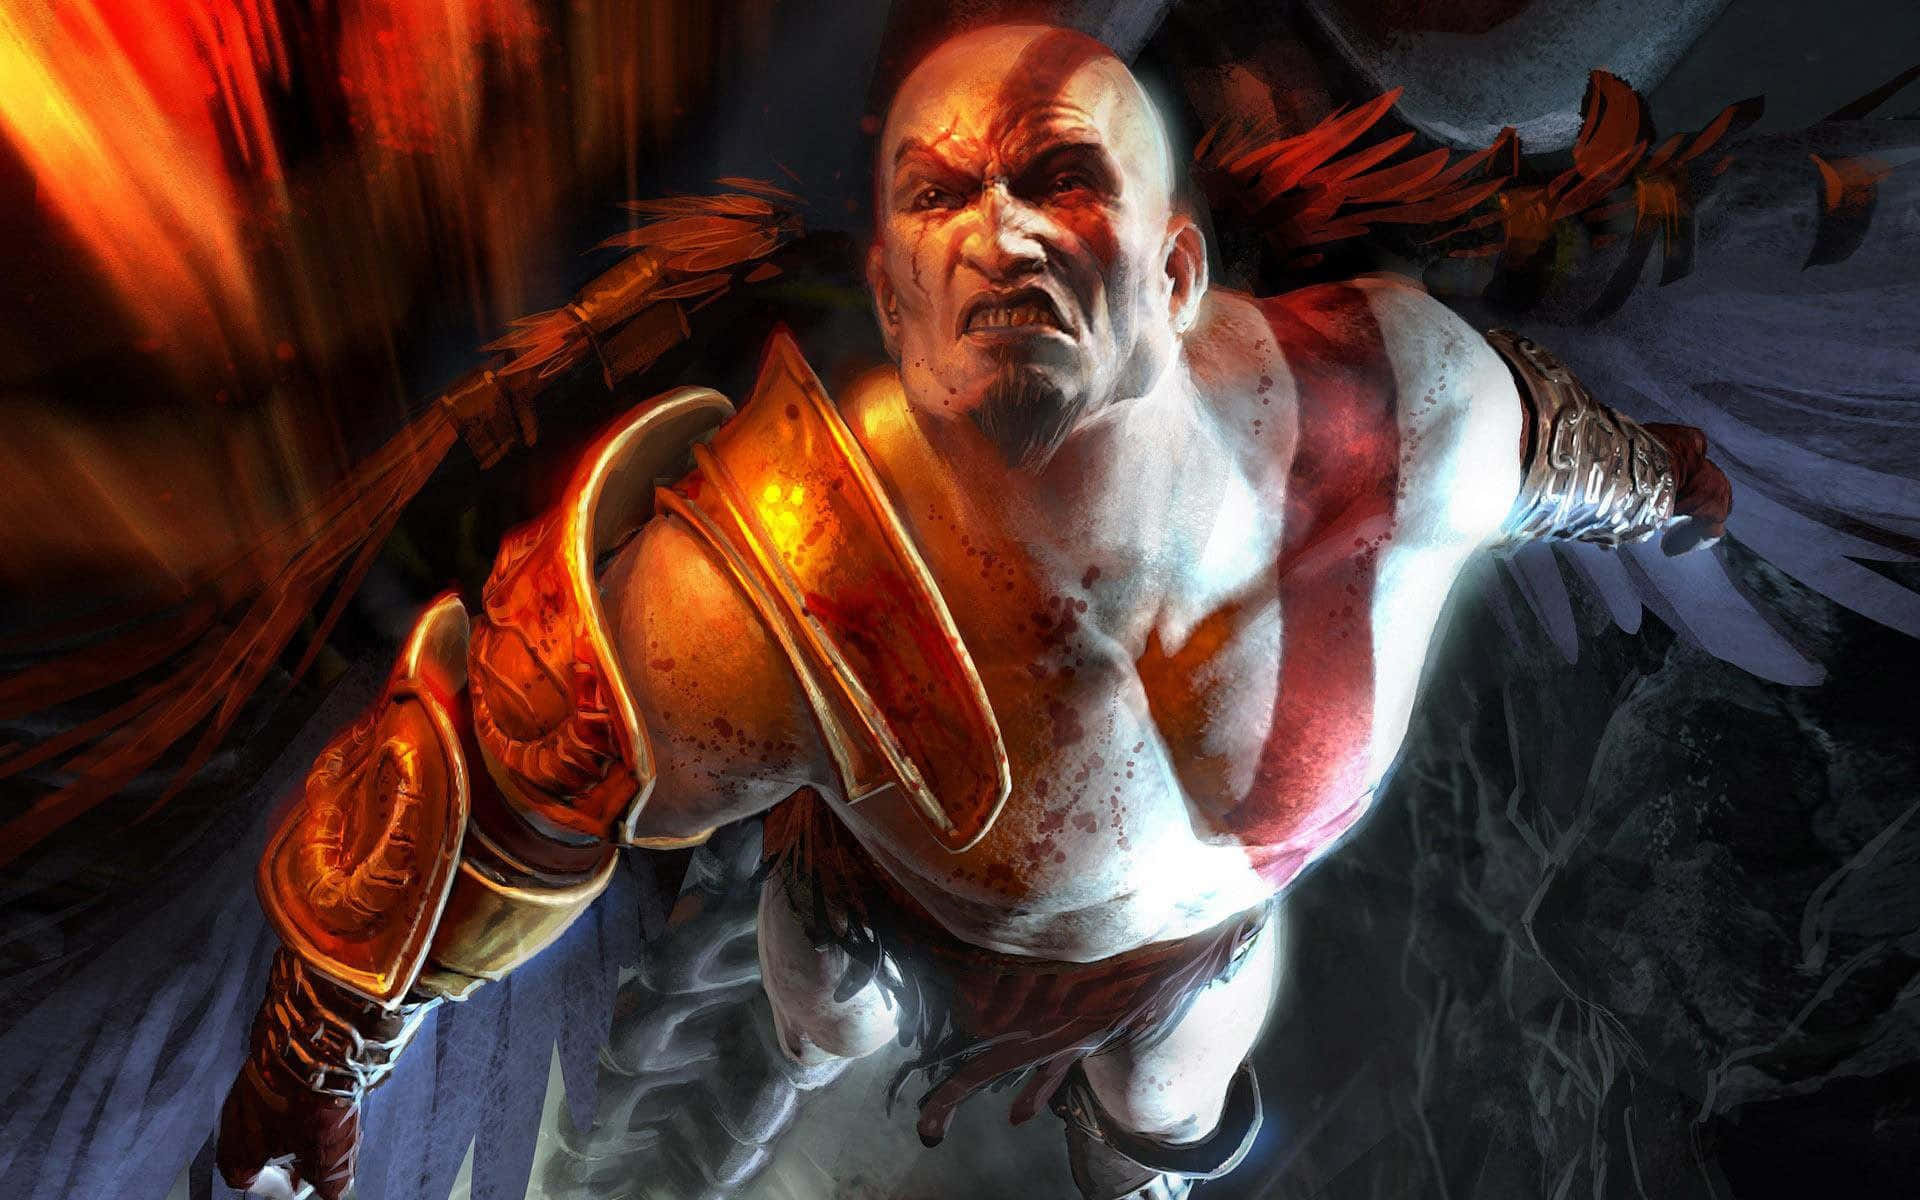 Kratos, the God of War, goes to battle against the gods of Olympus Wallpaper